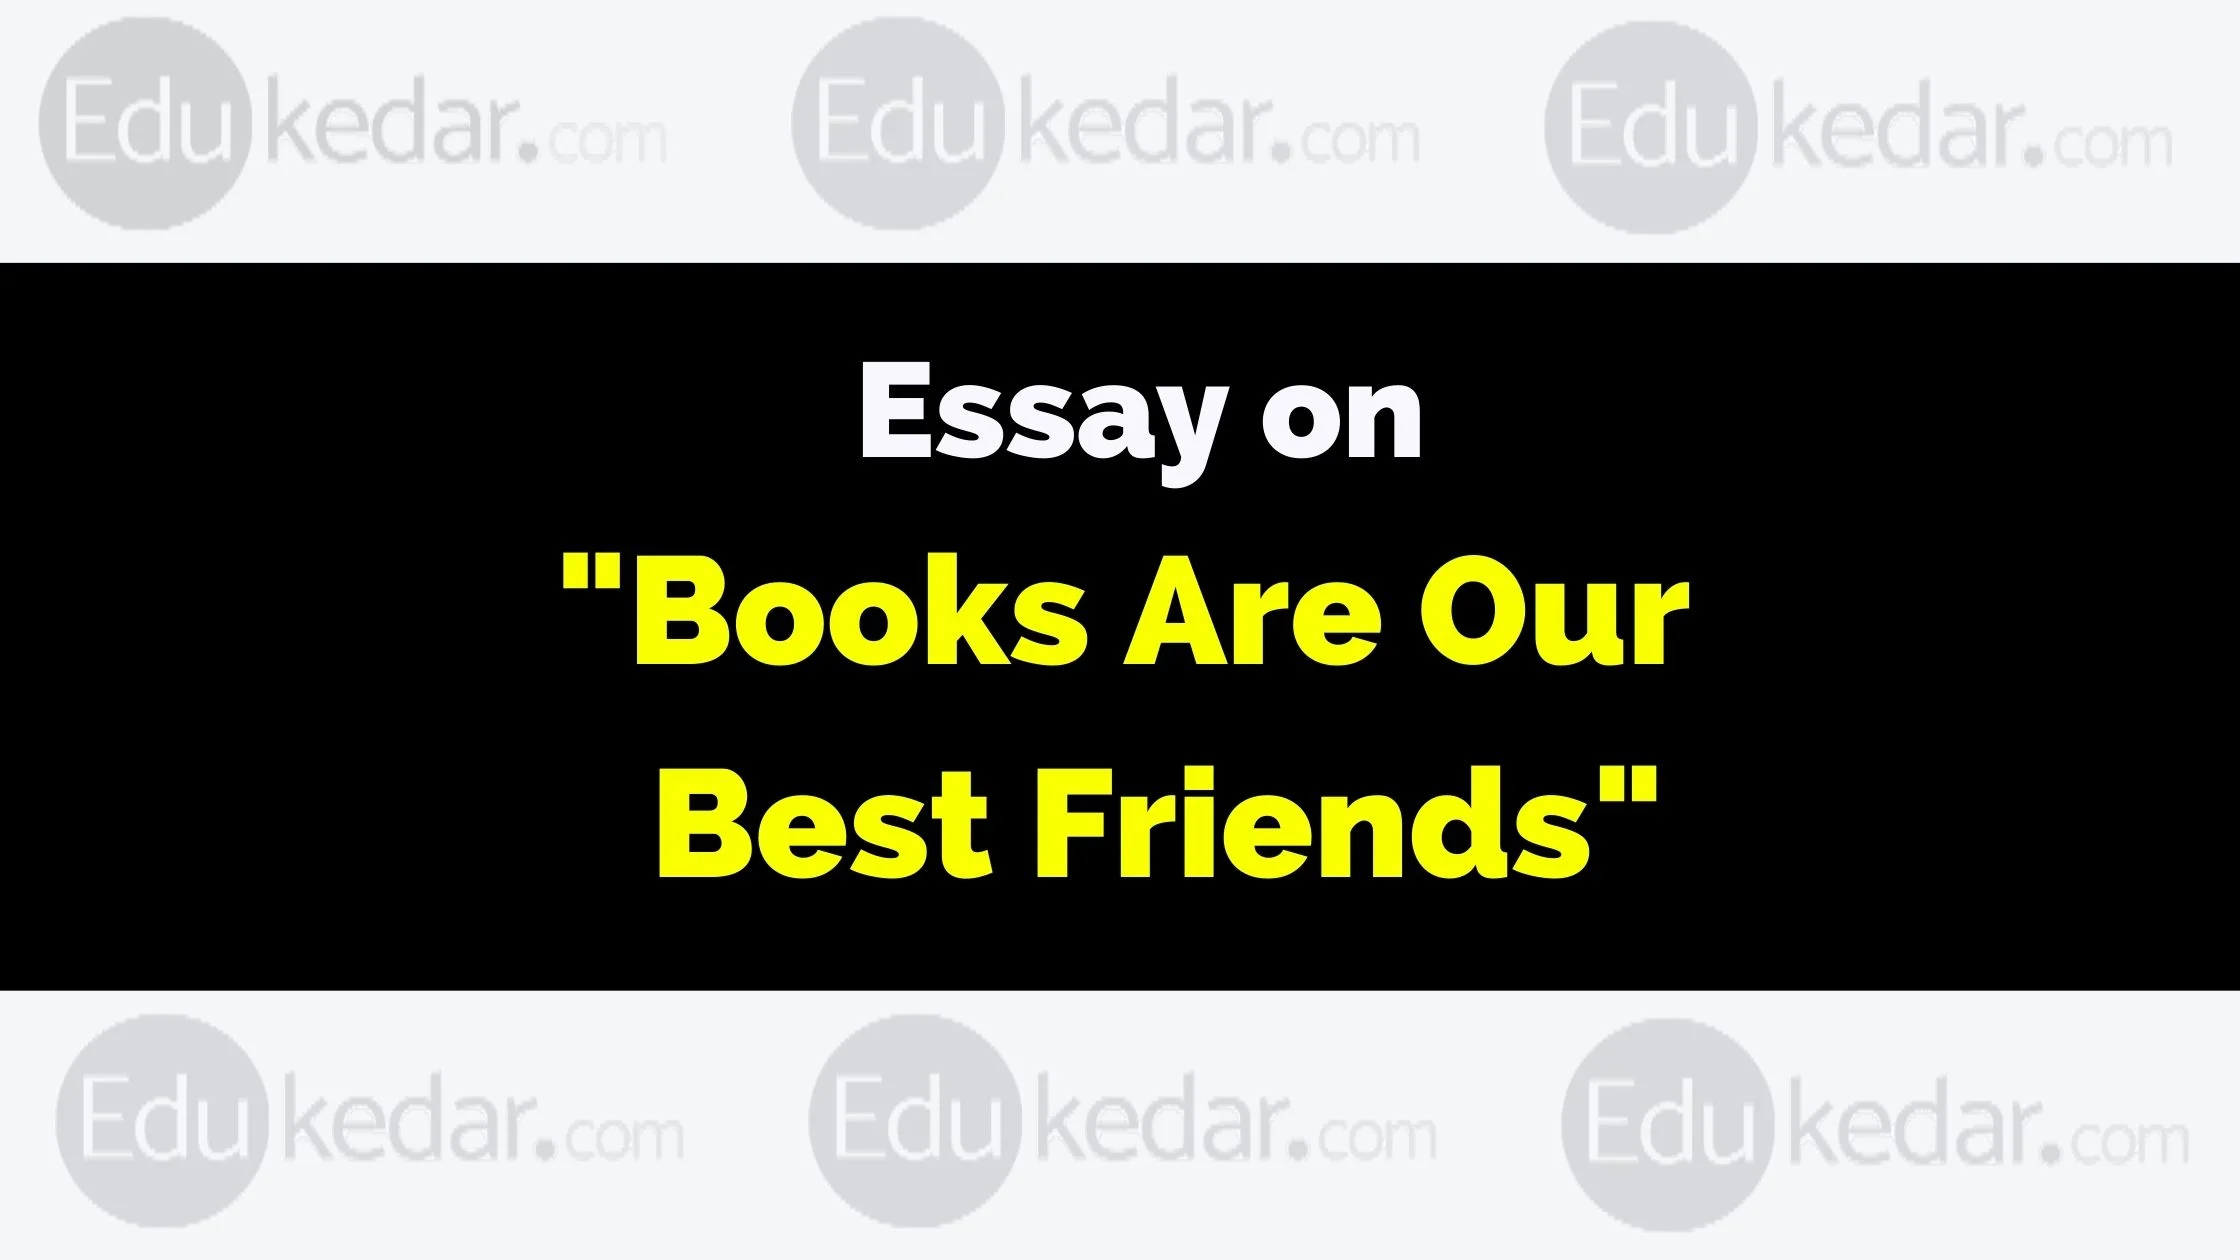 essay on books as friends